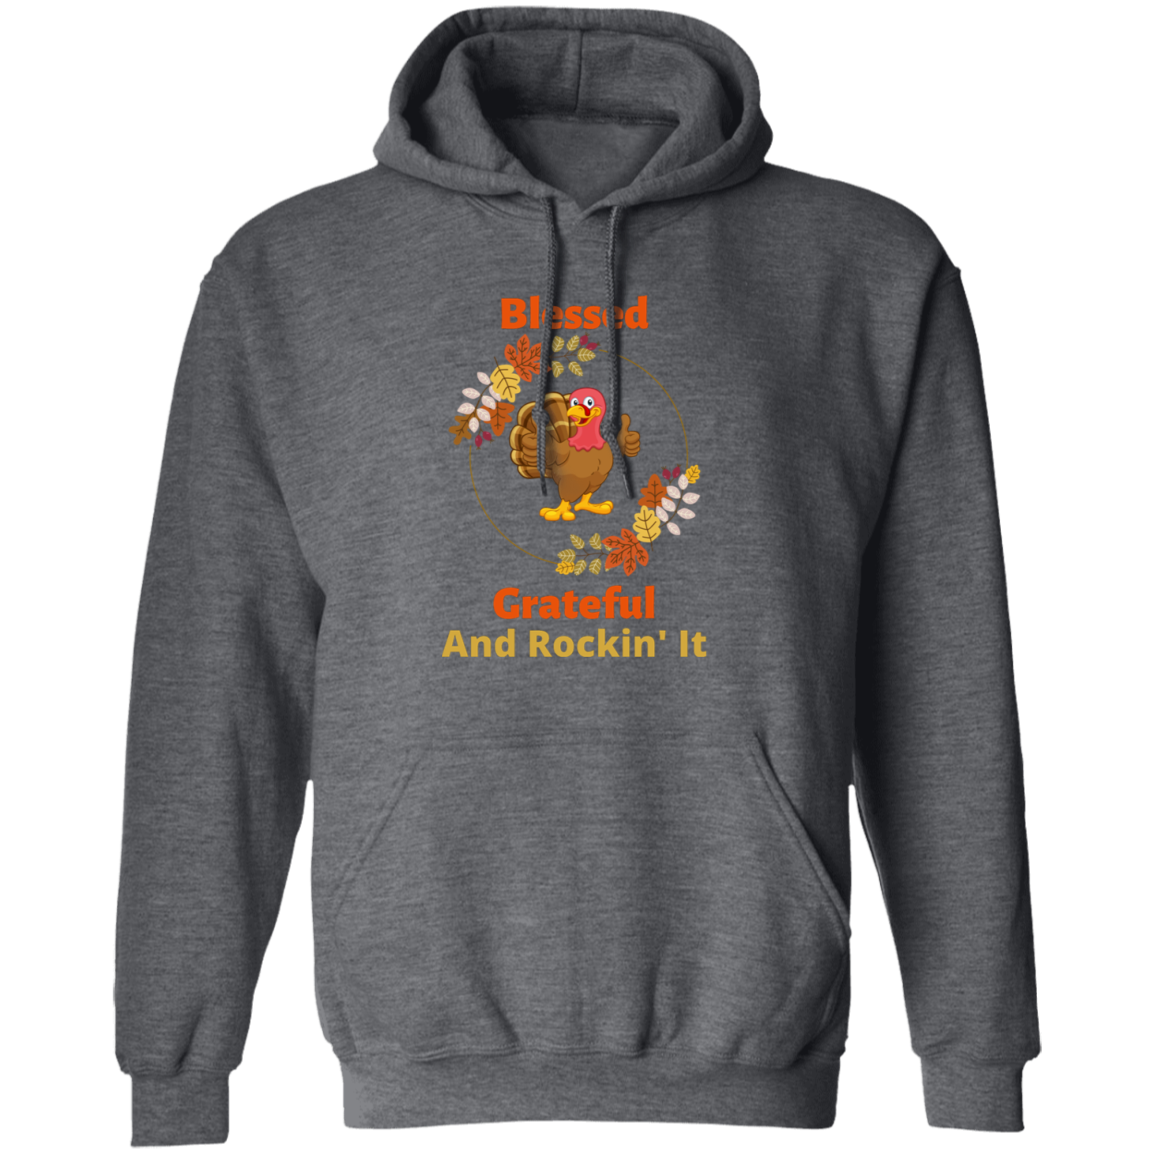 Blessed Grateful And Rockin' It Pullover Hoodie